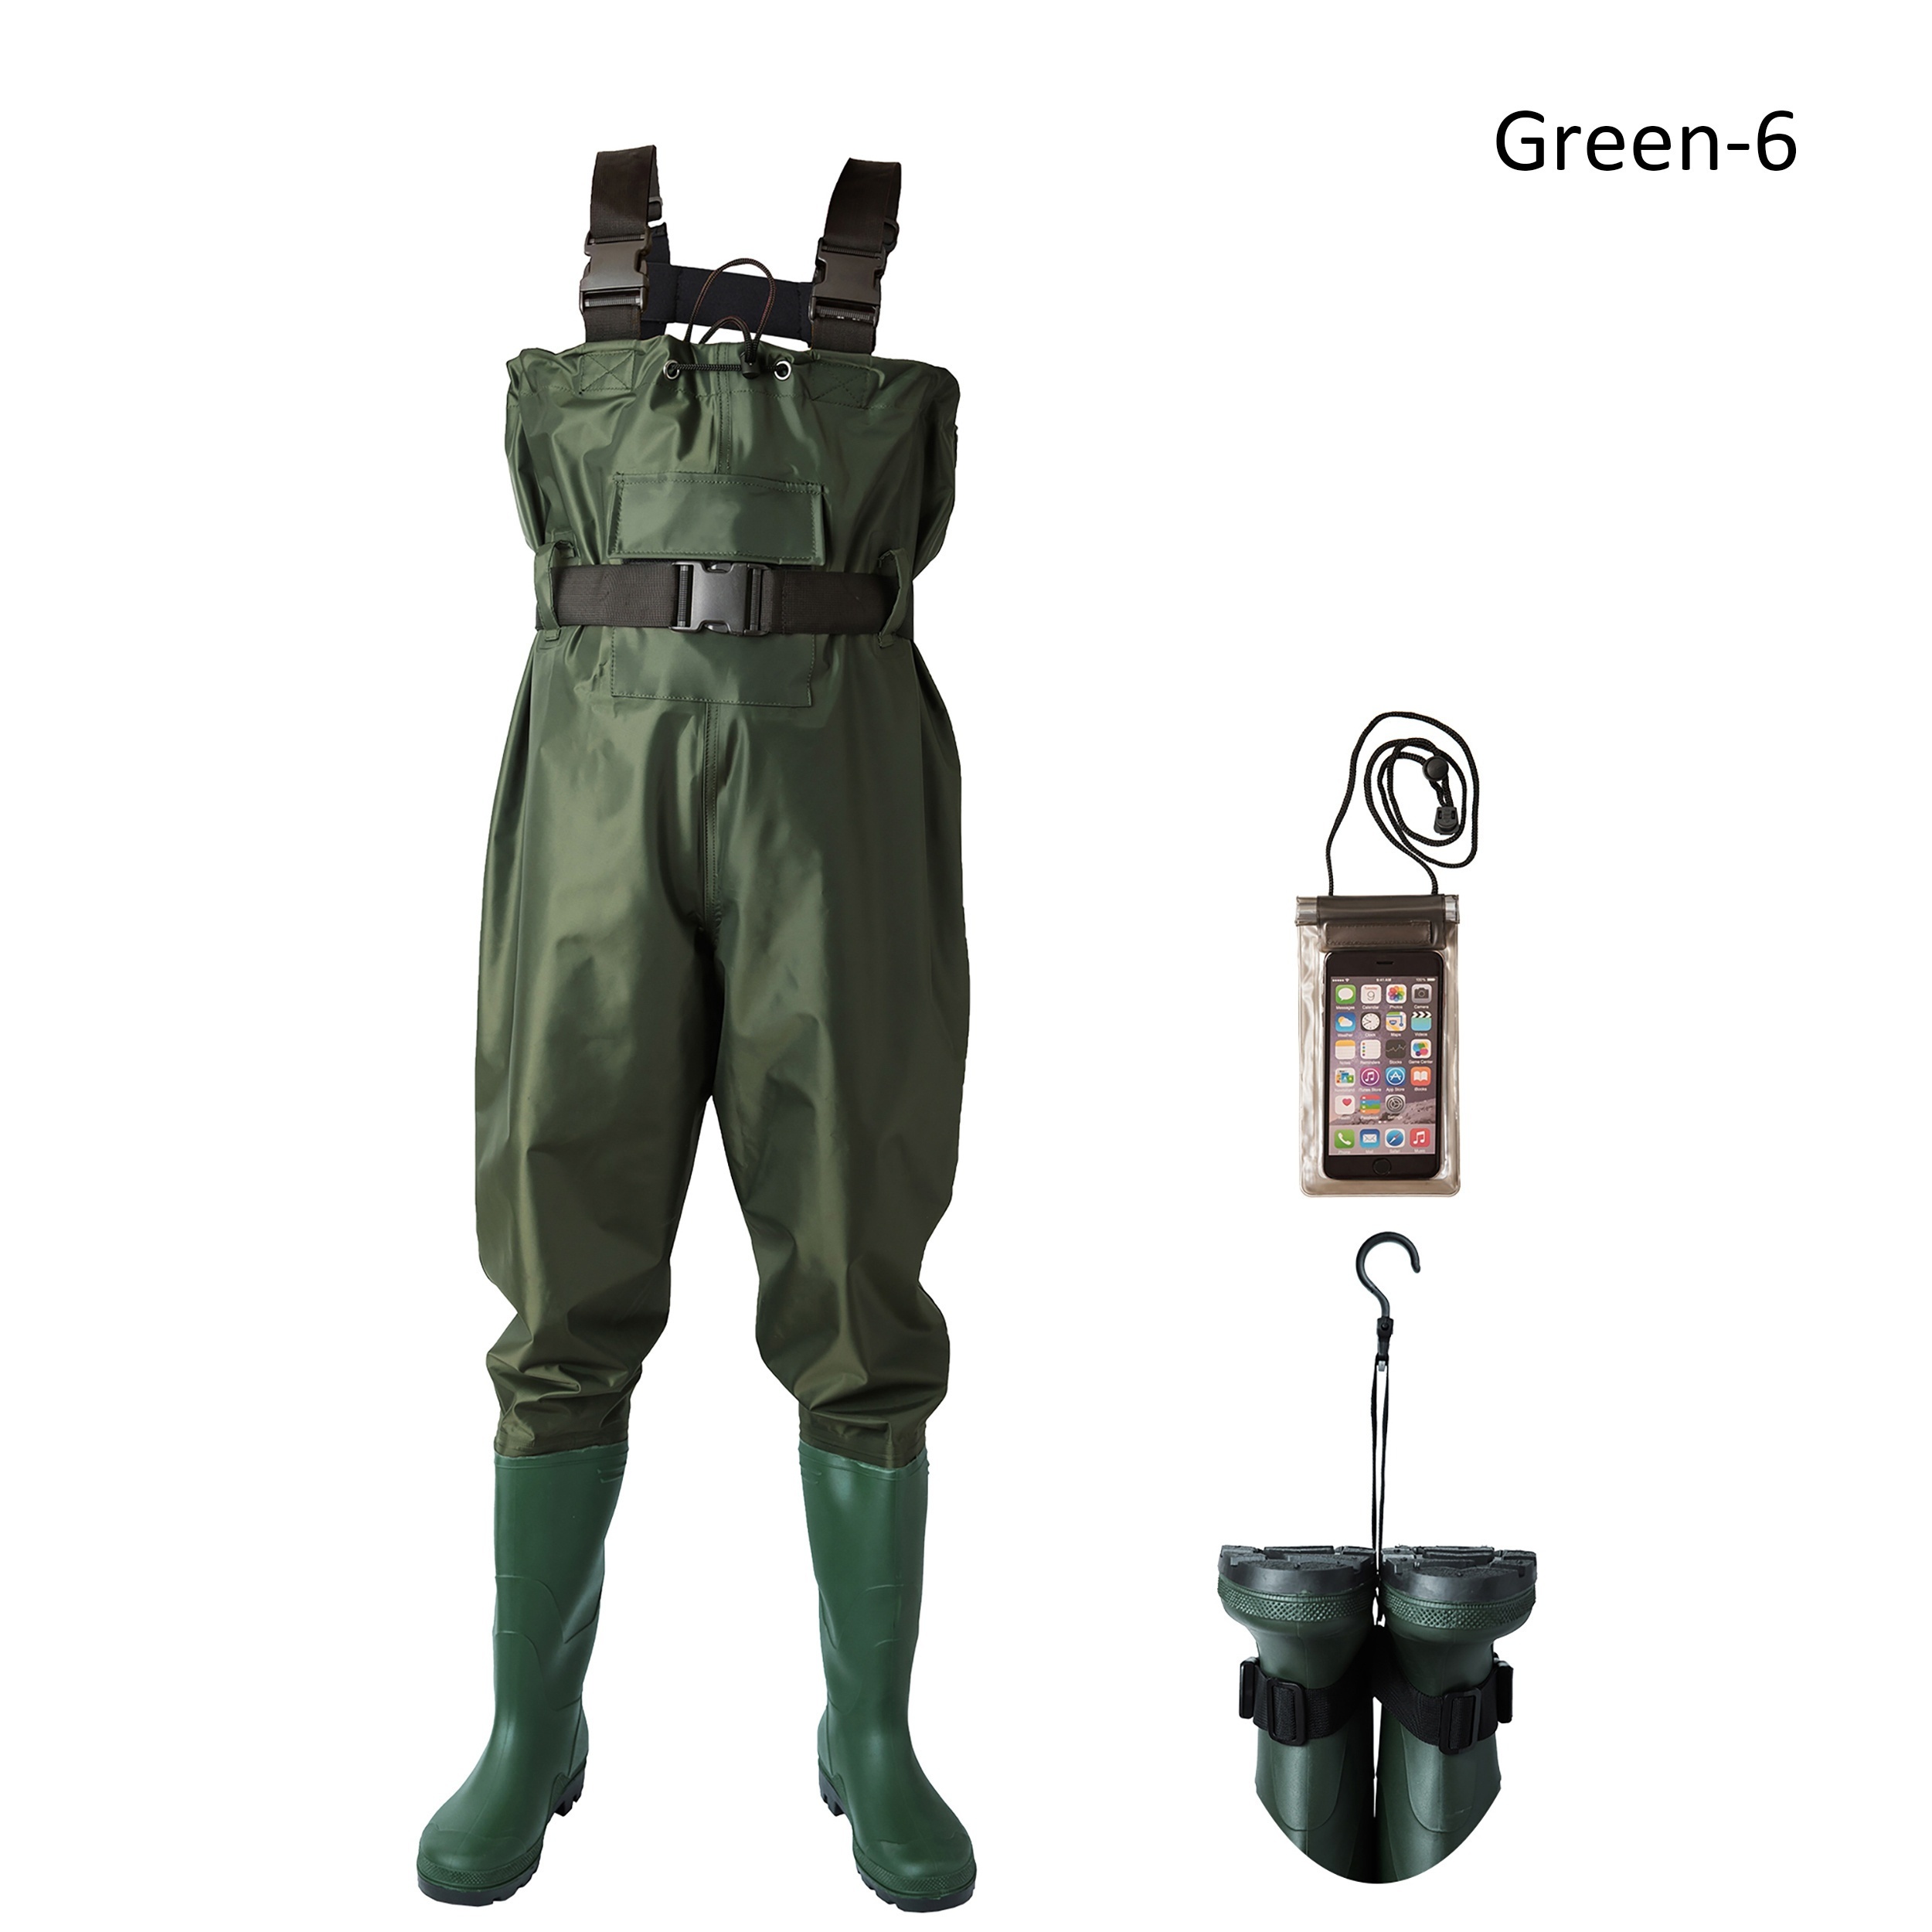  Fishing Wader Clothes Men and Women Portable Chest Overalls  Waterproof Clothes Wading Pants Stockings Foot Suitable for Fishing and  Agriculture, Green, 5XL (EU45US11) : Sports & Outdoors